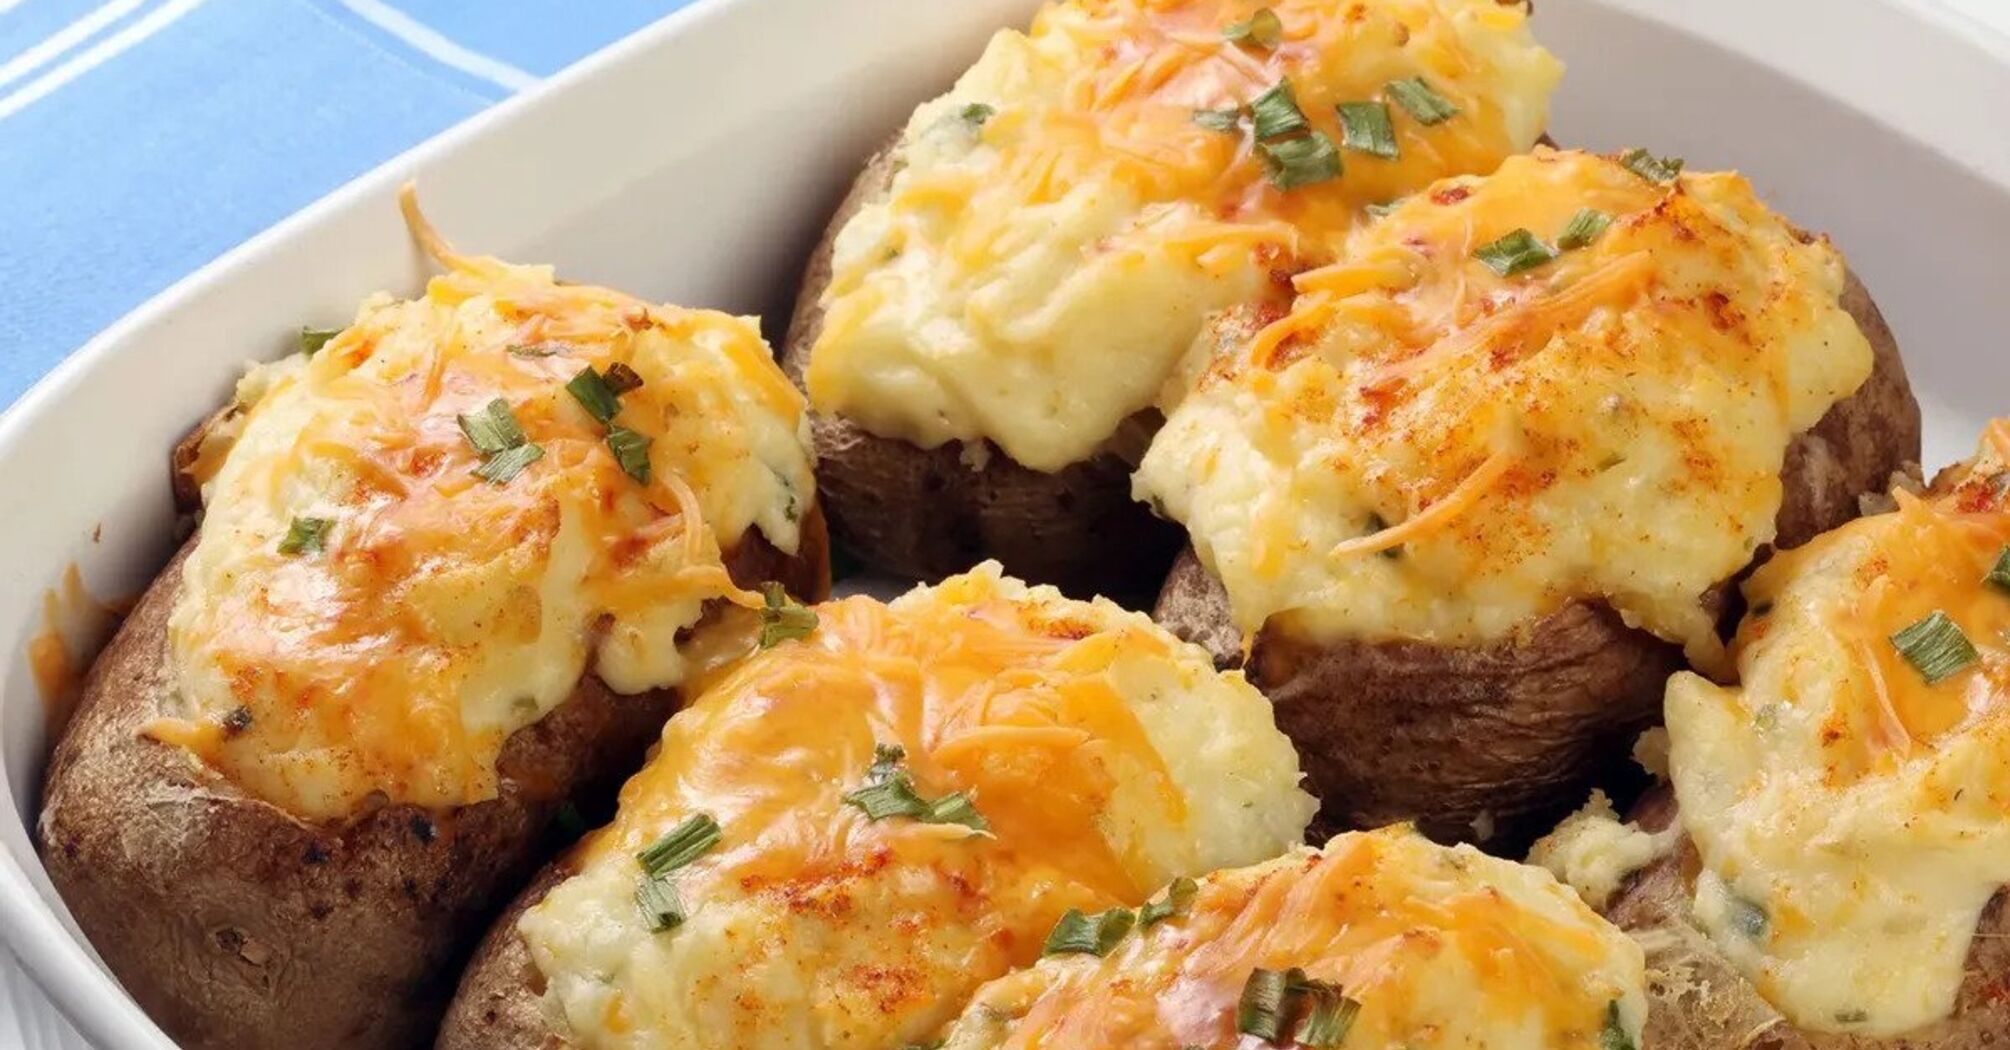 Delicious and creamy baked jacket potatoes | SSP Daily